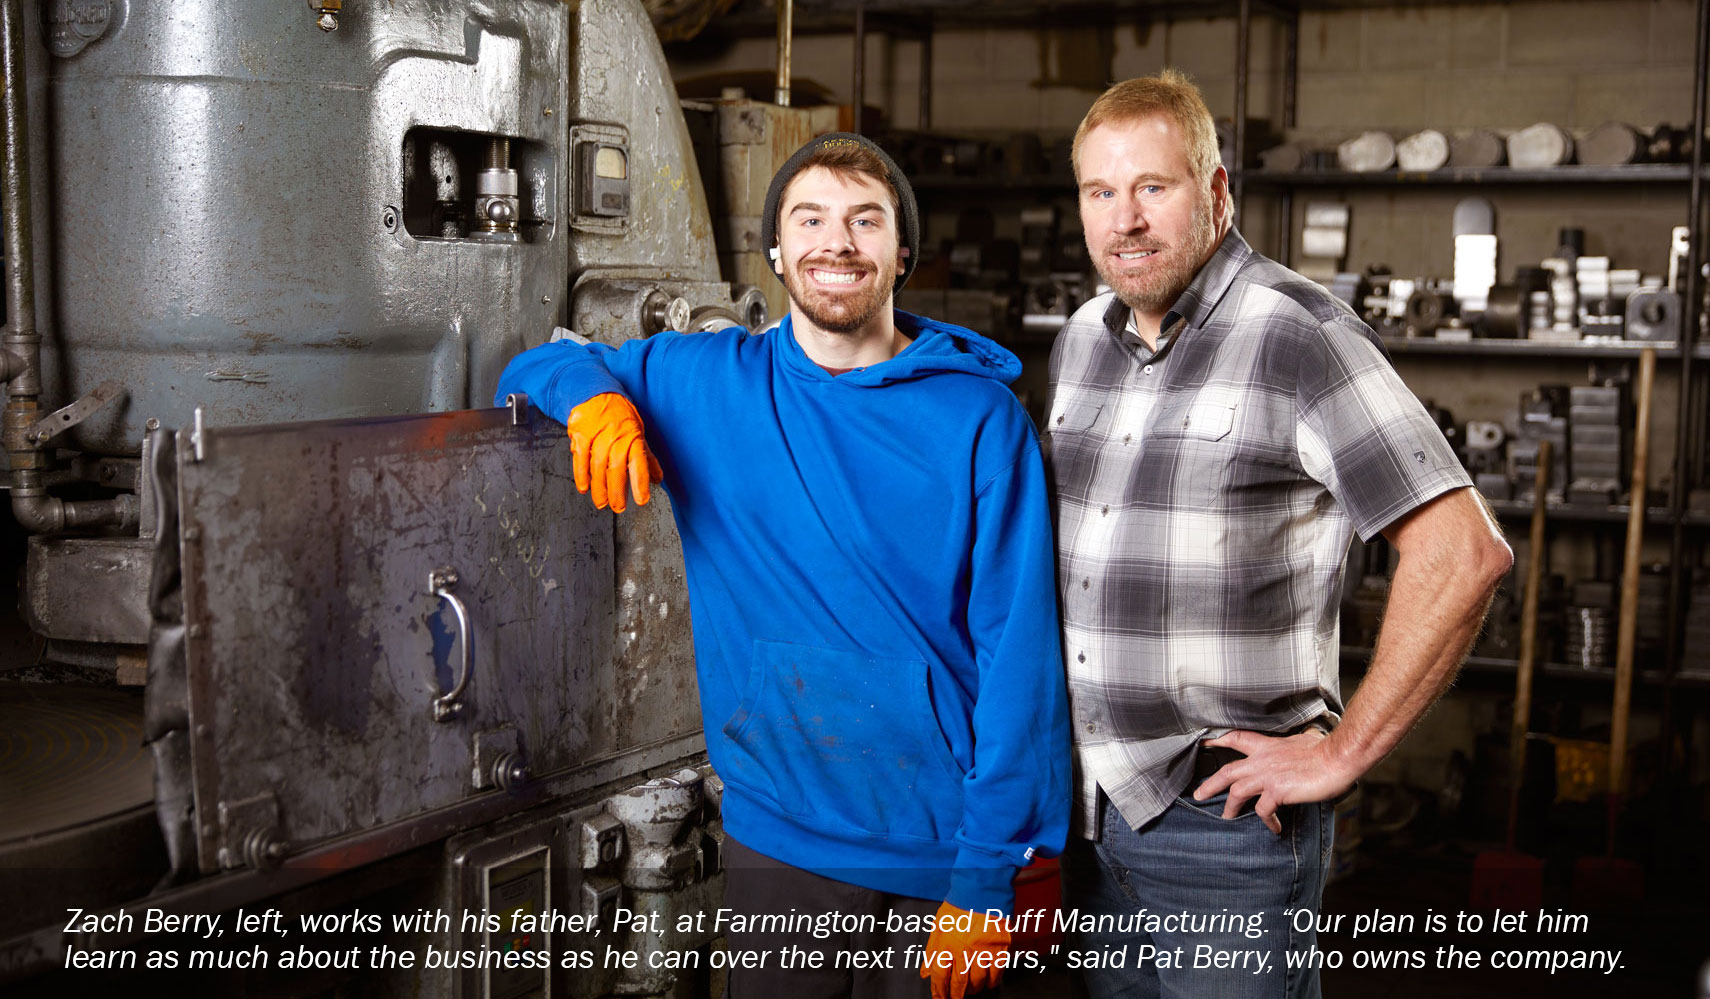 Zach Berry, left, works with his father, Pat, at Farmington-based Ruff Manufacturing. “Our plan is to let him learn as much about the business as he can over the next five years," said Pat Berry, who owns the company.